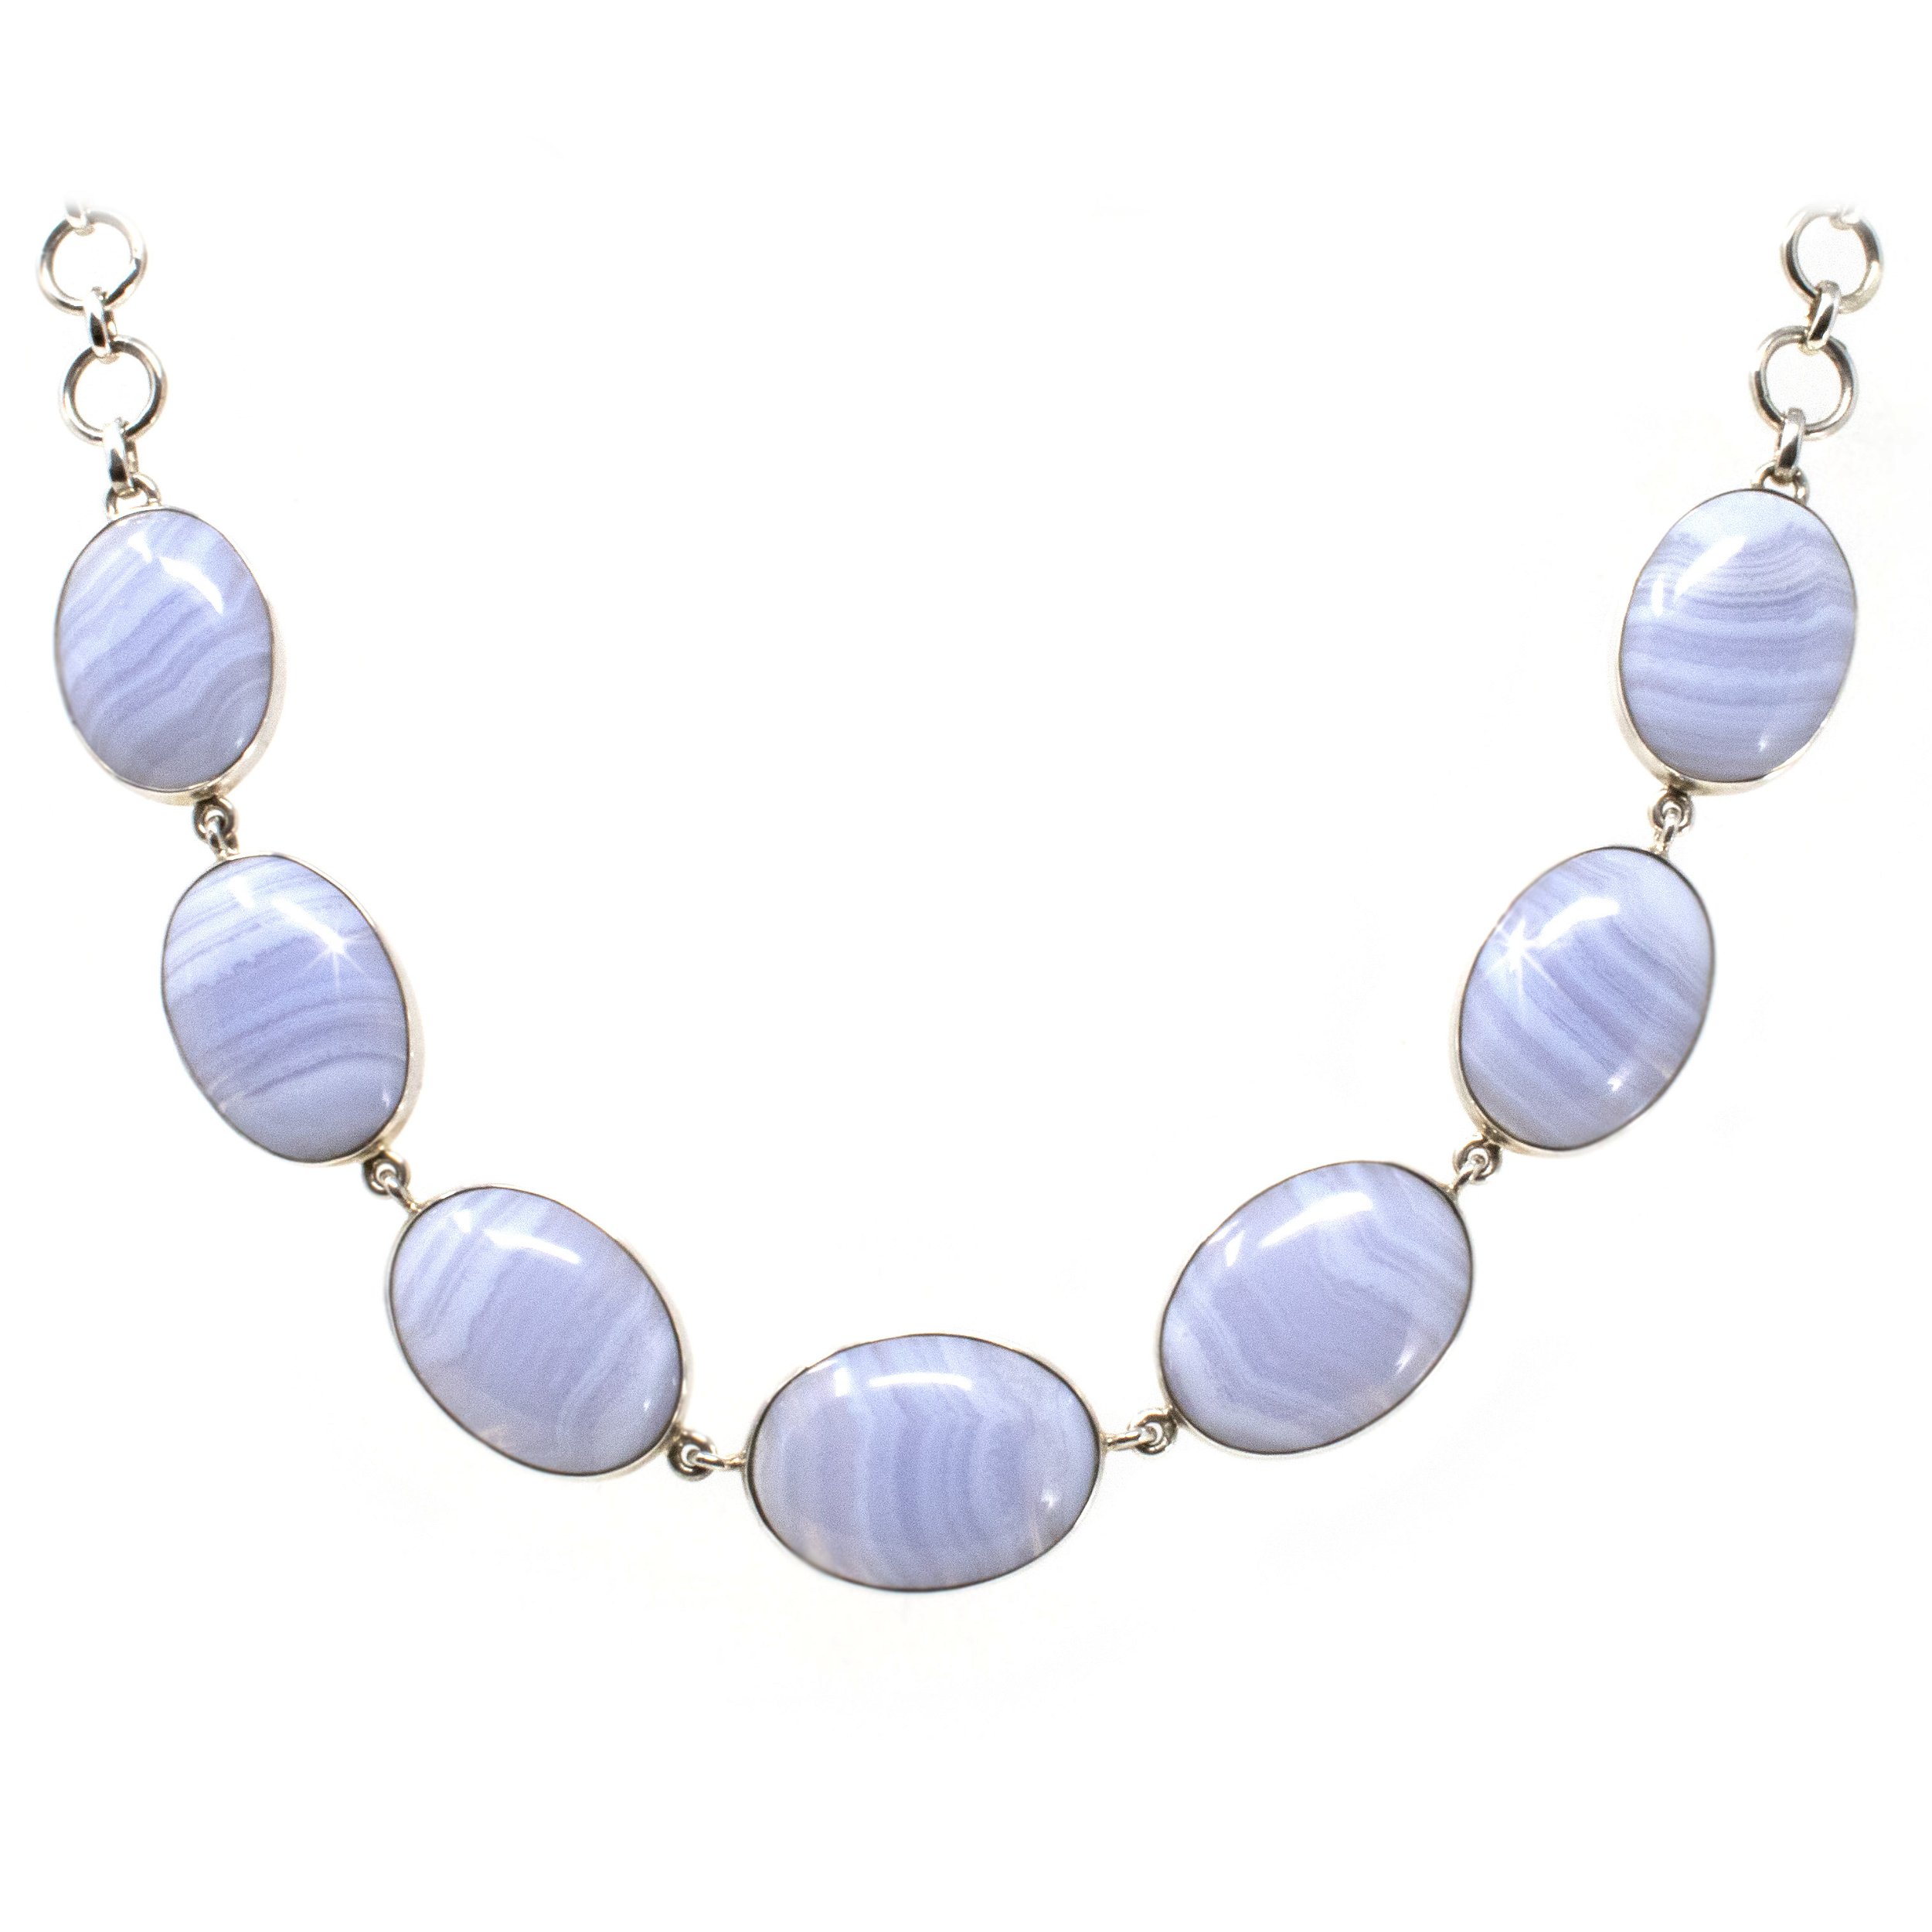 Banded and Blue Lace Agate Necklace – Eskra Essential